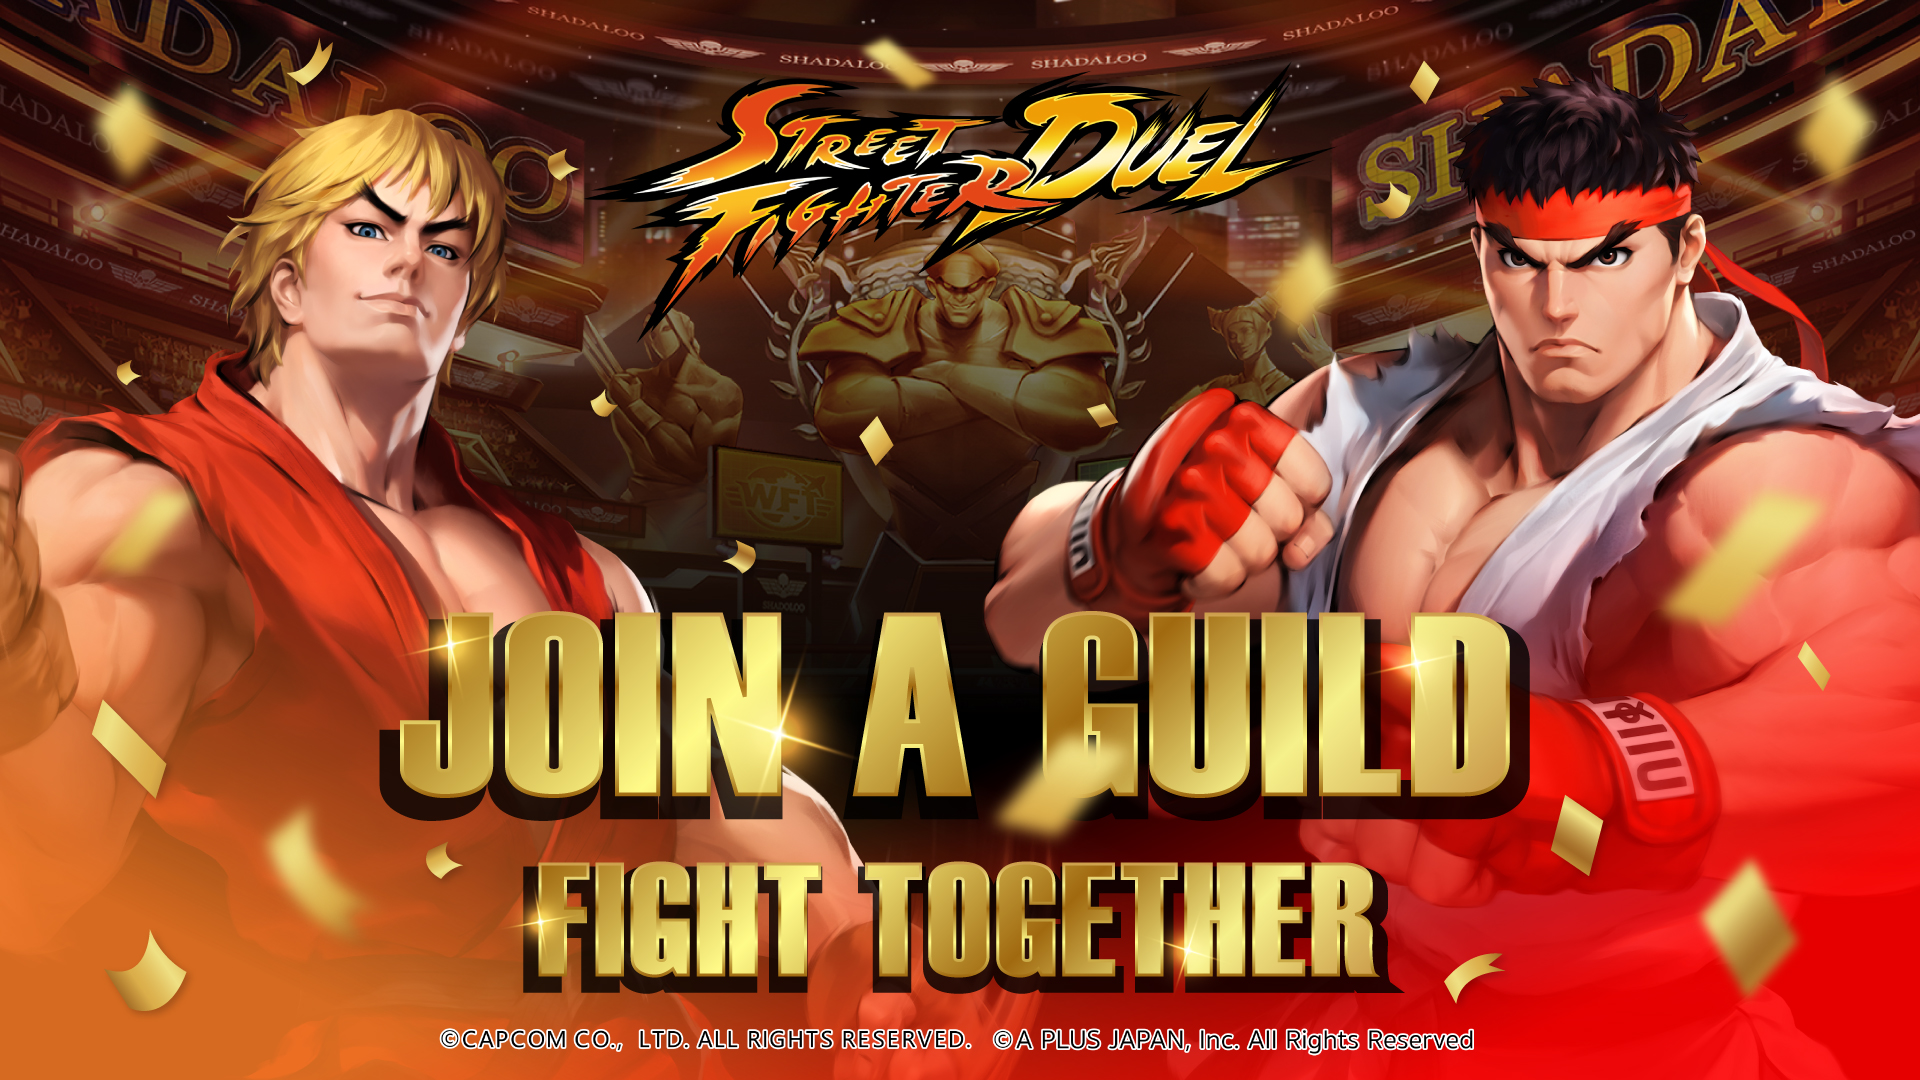 Street Fighter: Duel Launches February 28th